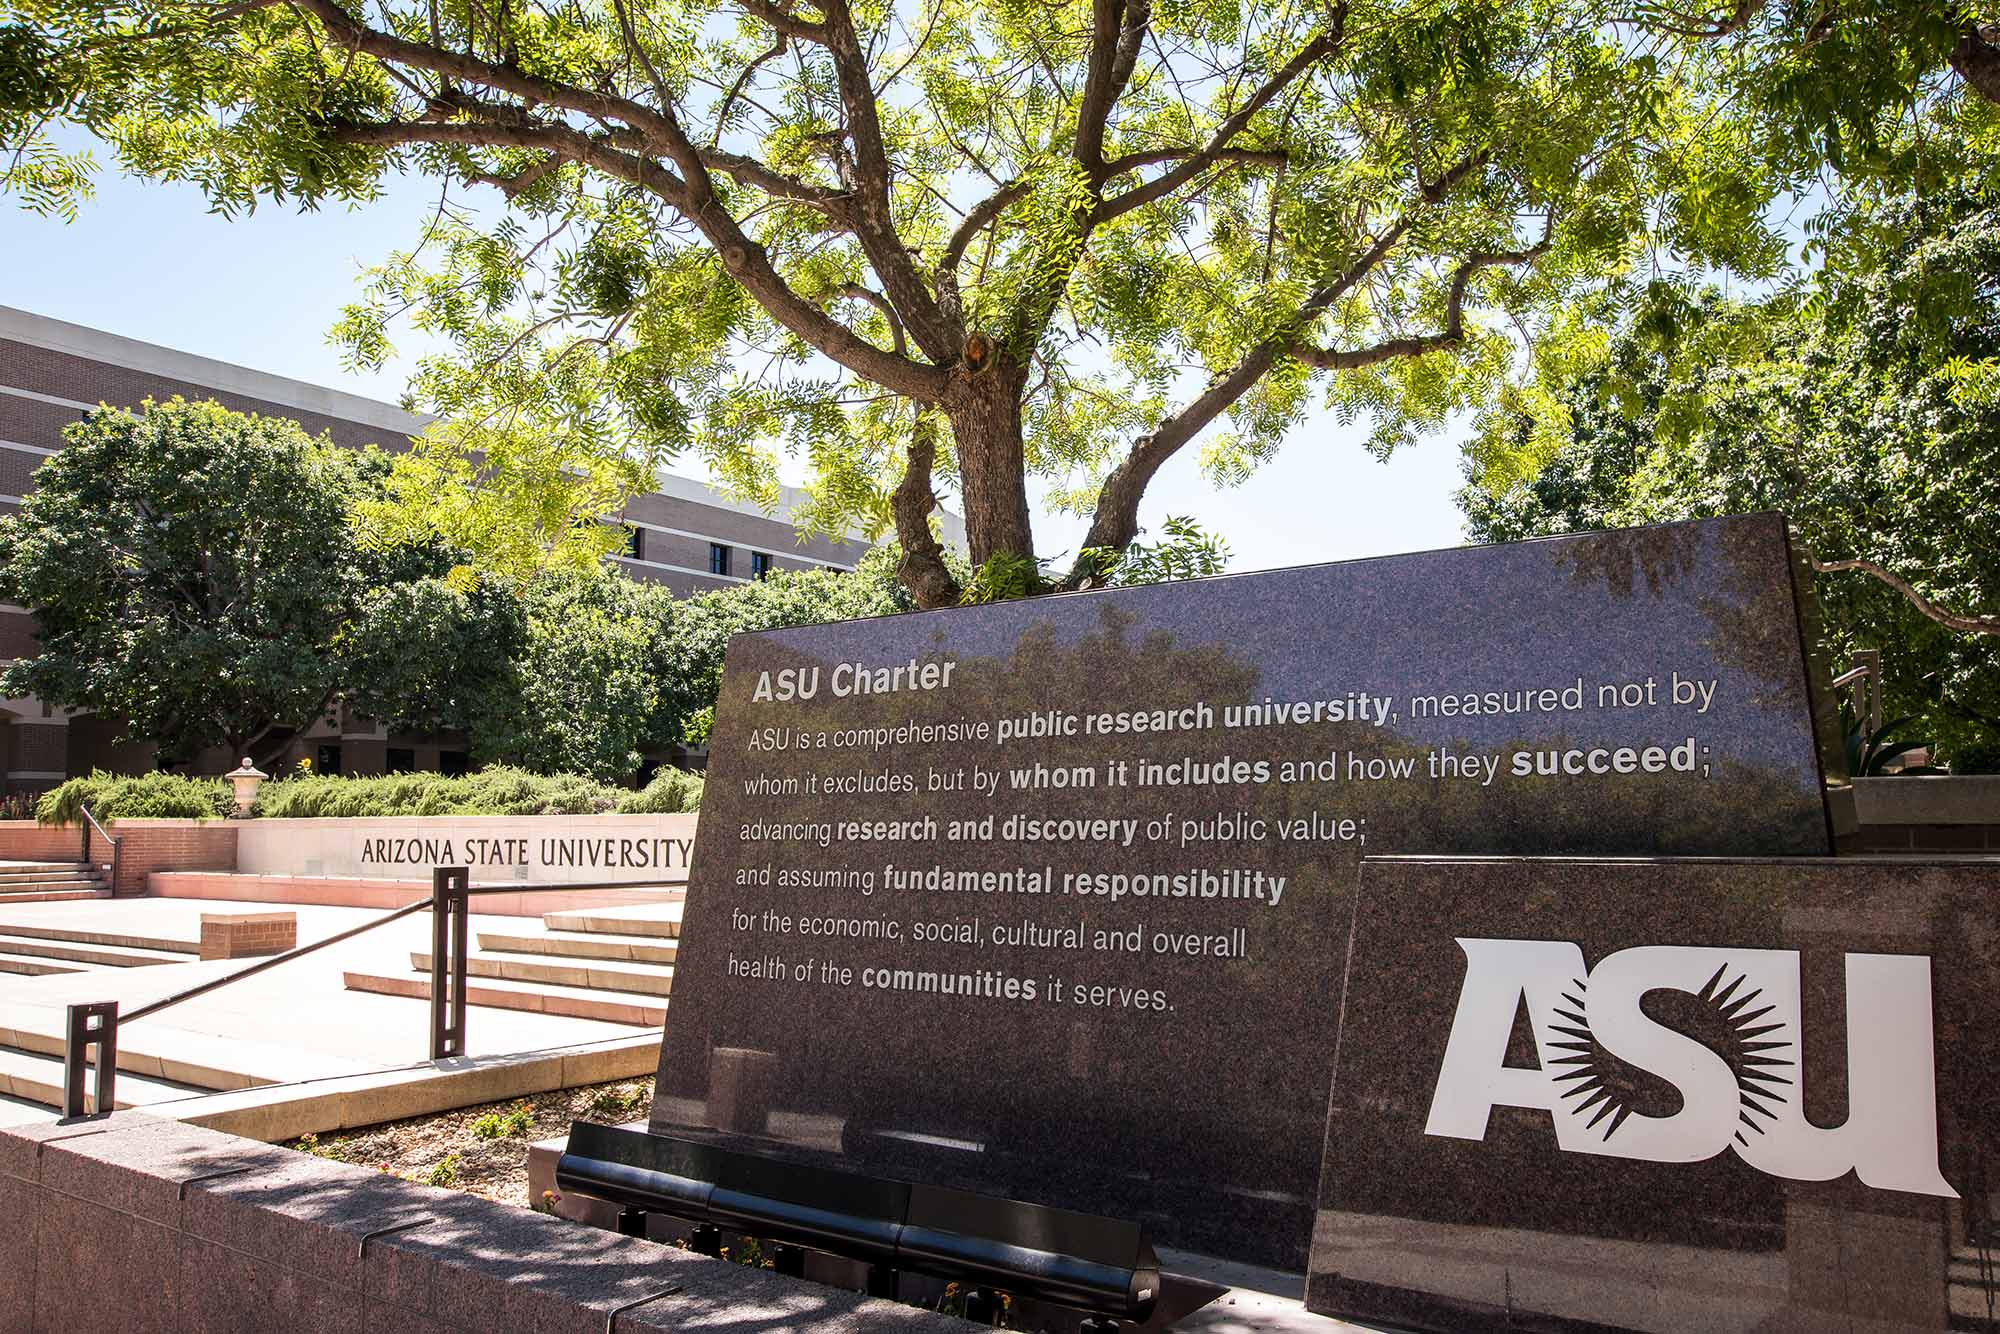 A scene from a sunny day on the ASU West campus, where you can see a large marble monument displaying an engraving of the ASU Charter